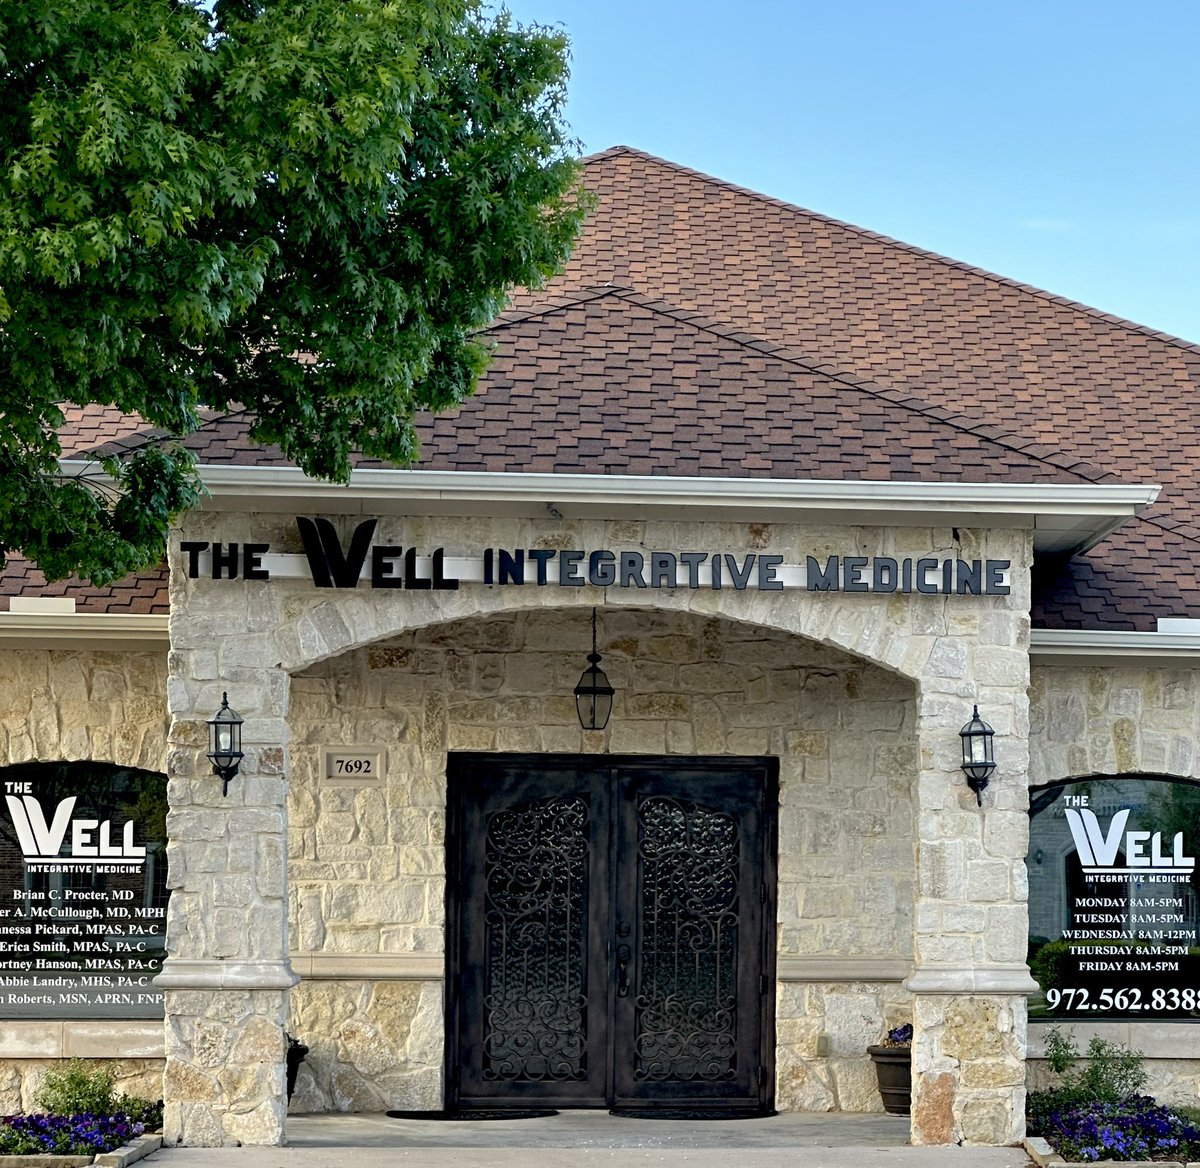 Get ready for a fresh new look with the same trusted staff and doctors @P_McCulloughMD @MelissaProcter8 
The Well Integrative Medicine is accepting new patients. @Covid19Critical #CourageousDiscourse